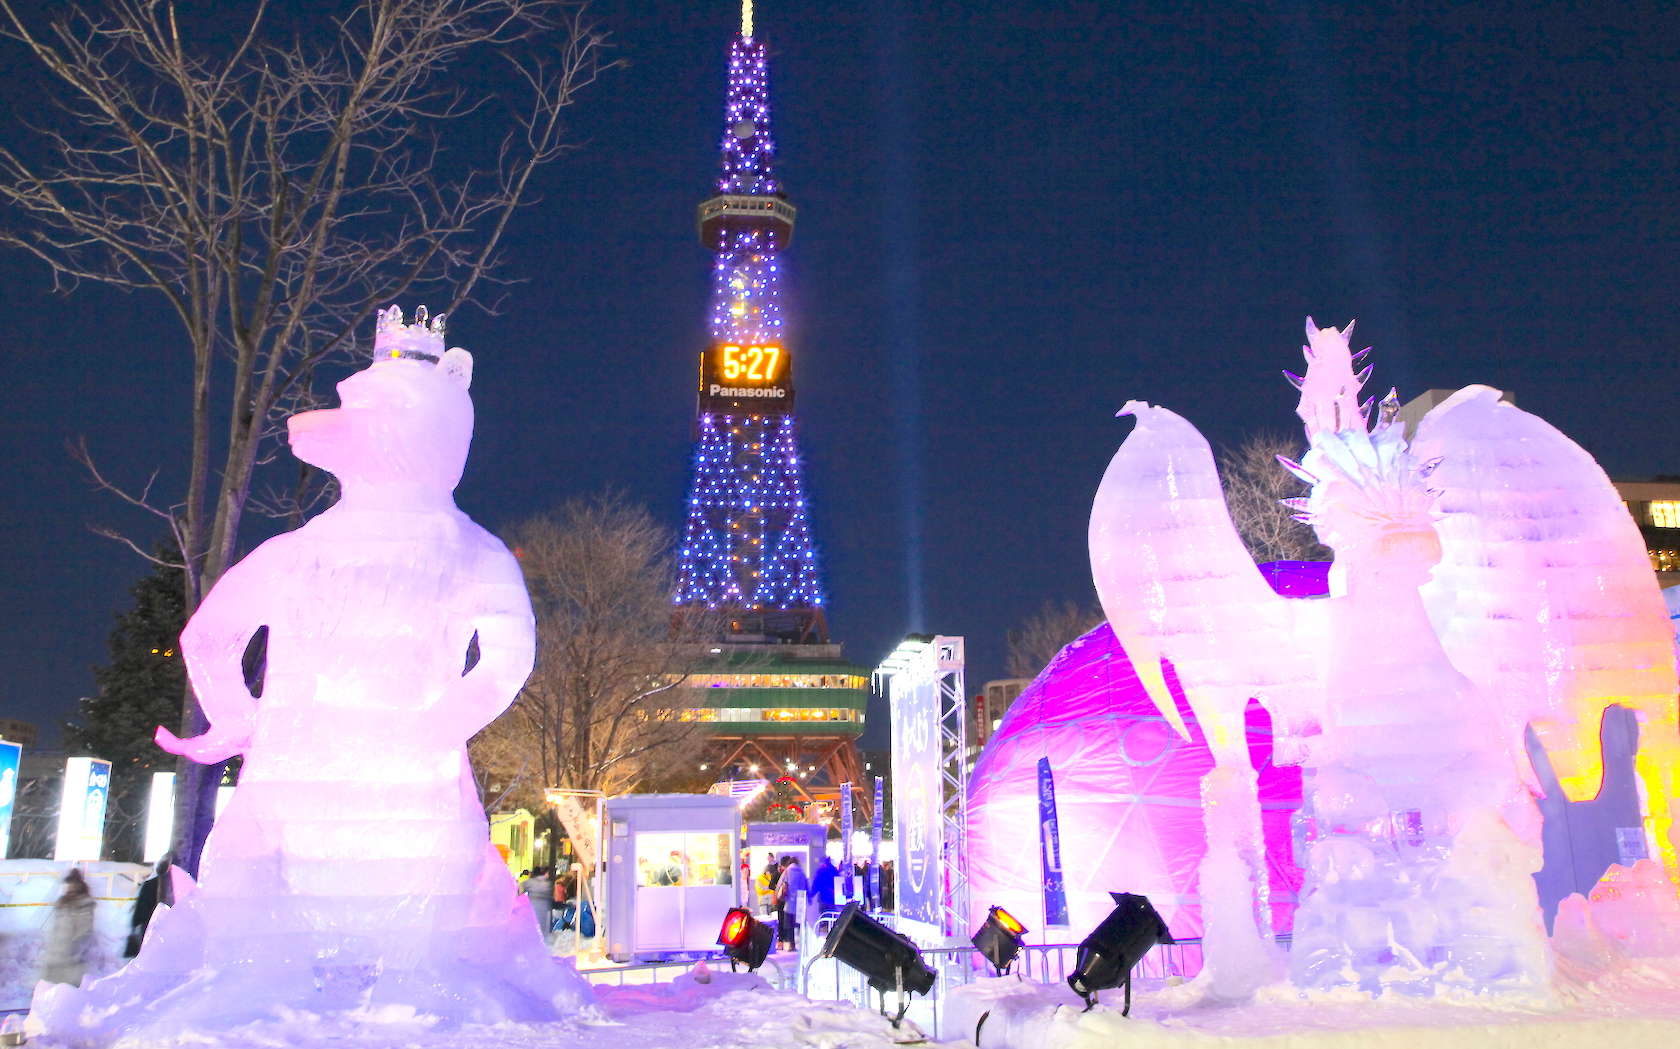 Ice sculptures of a bear and a dragon at the Sapporo White Illumination